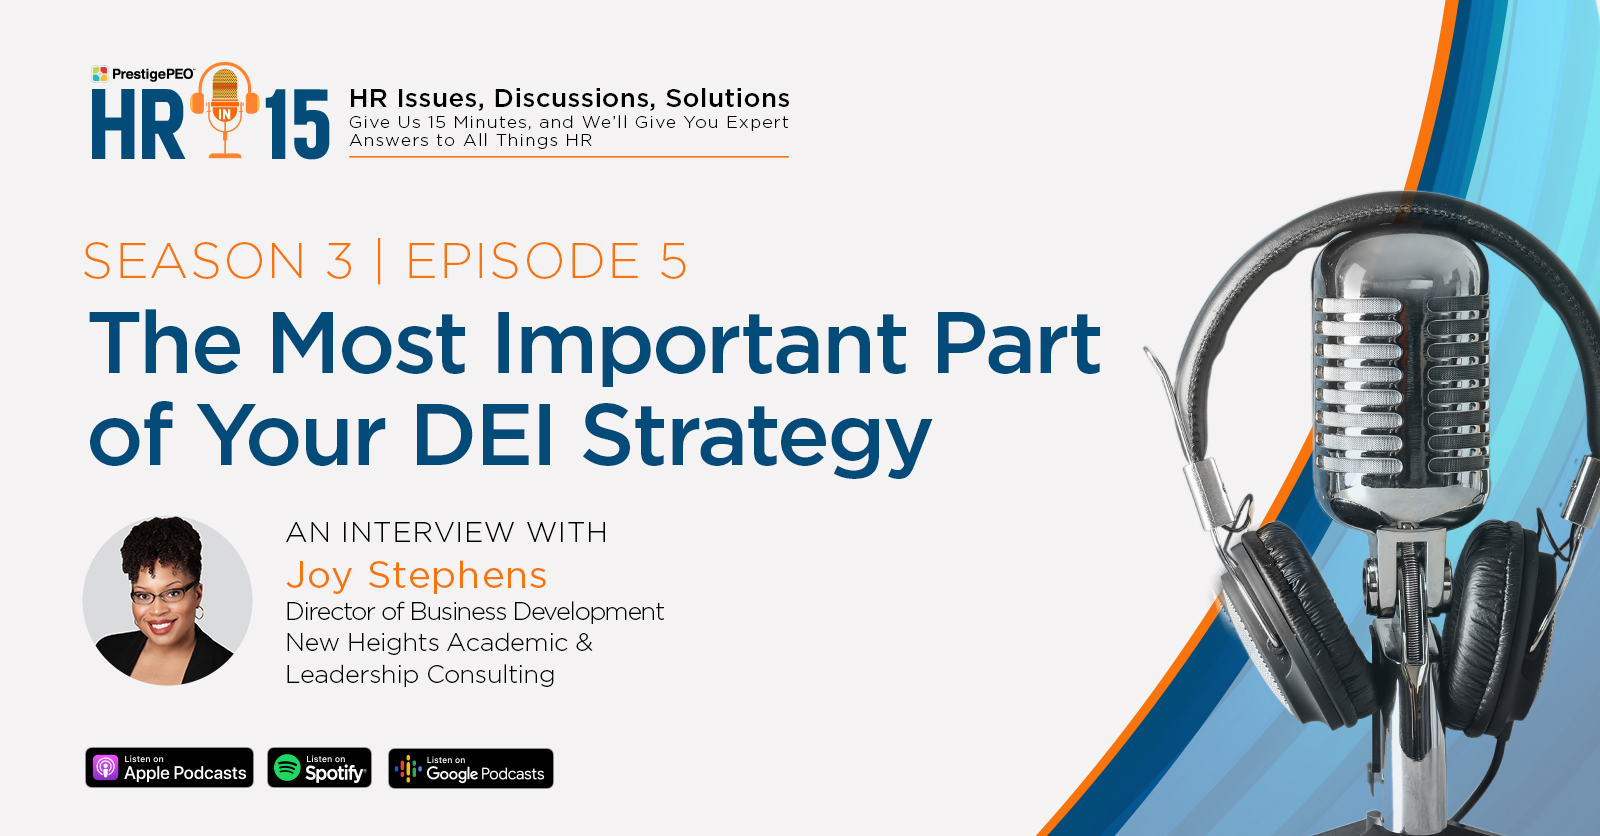 HR-in-15 Interview with Joy Stephens: The most important part of your DEI strategy